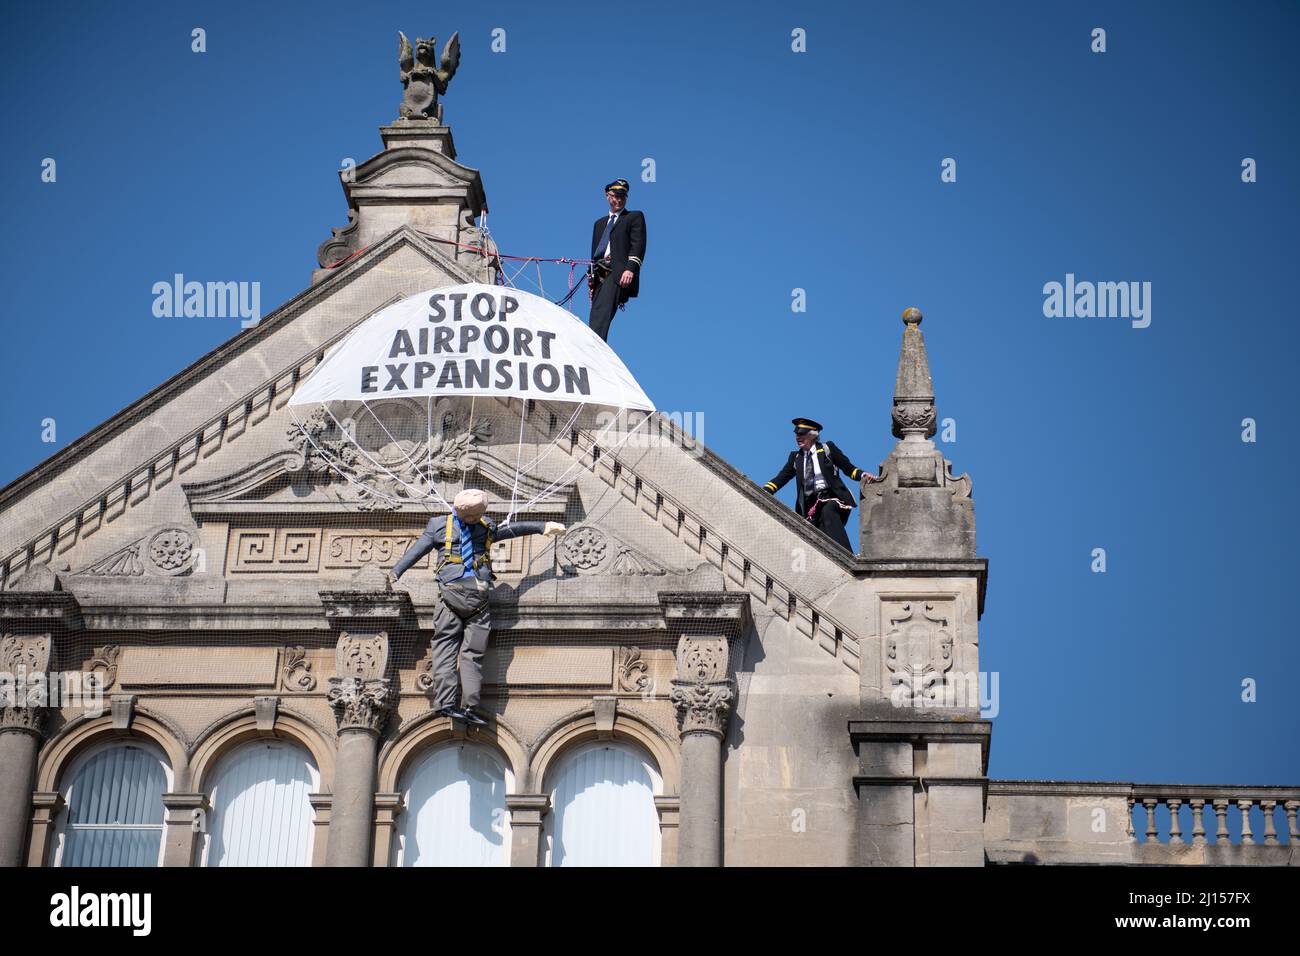 Weston-super-Mare, North Somerset, UK. 20th July 2021. Pictured: Activists wearing pilot costumes climb the top of Weston-super-Mare Town Hall and unf Stock Photo